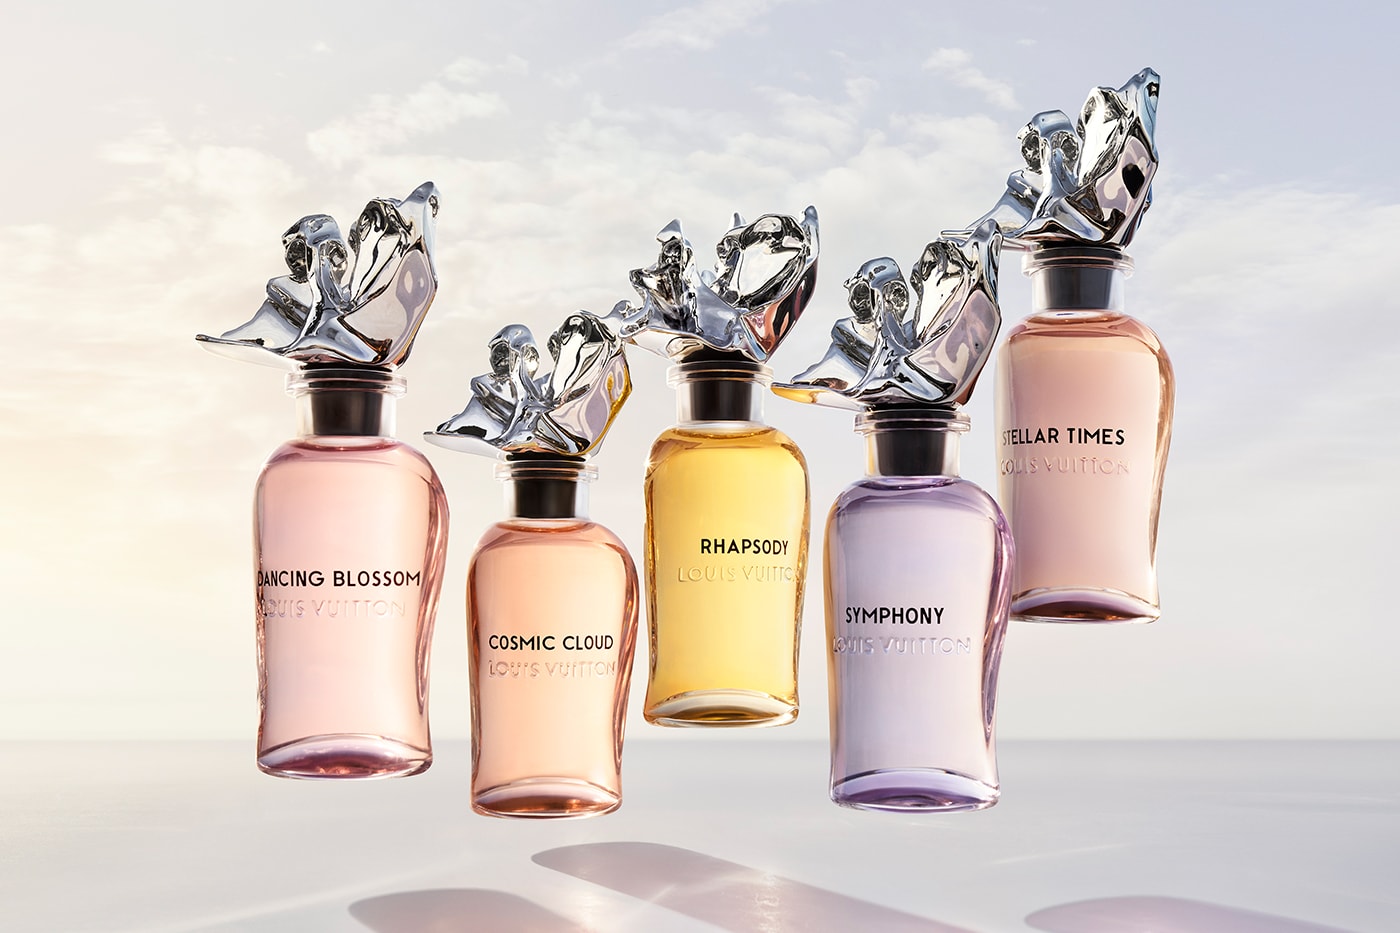 Louis Vuitton Frank Gehry Les Extraits Fragrance Collection collaboration architect  